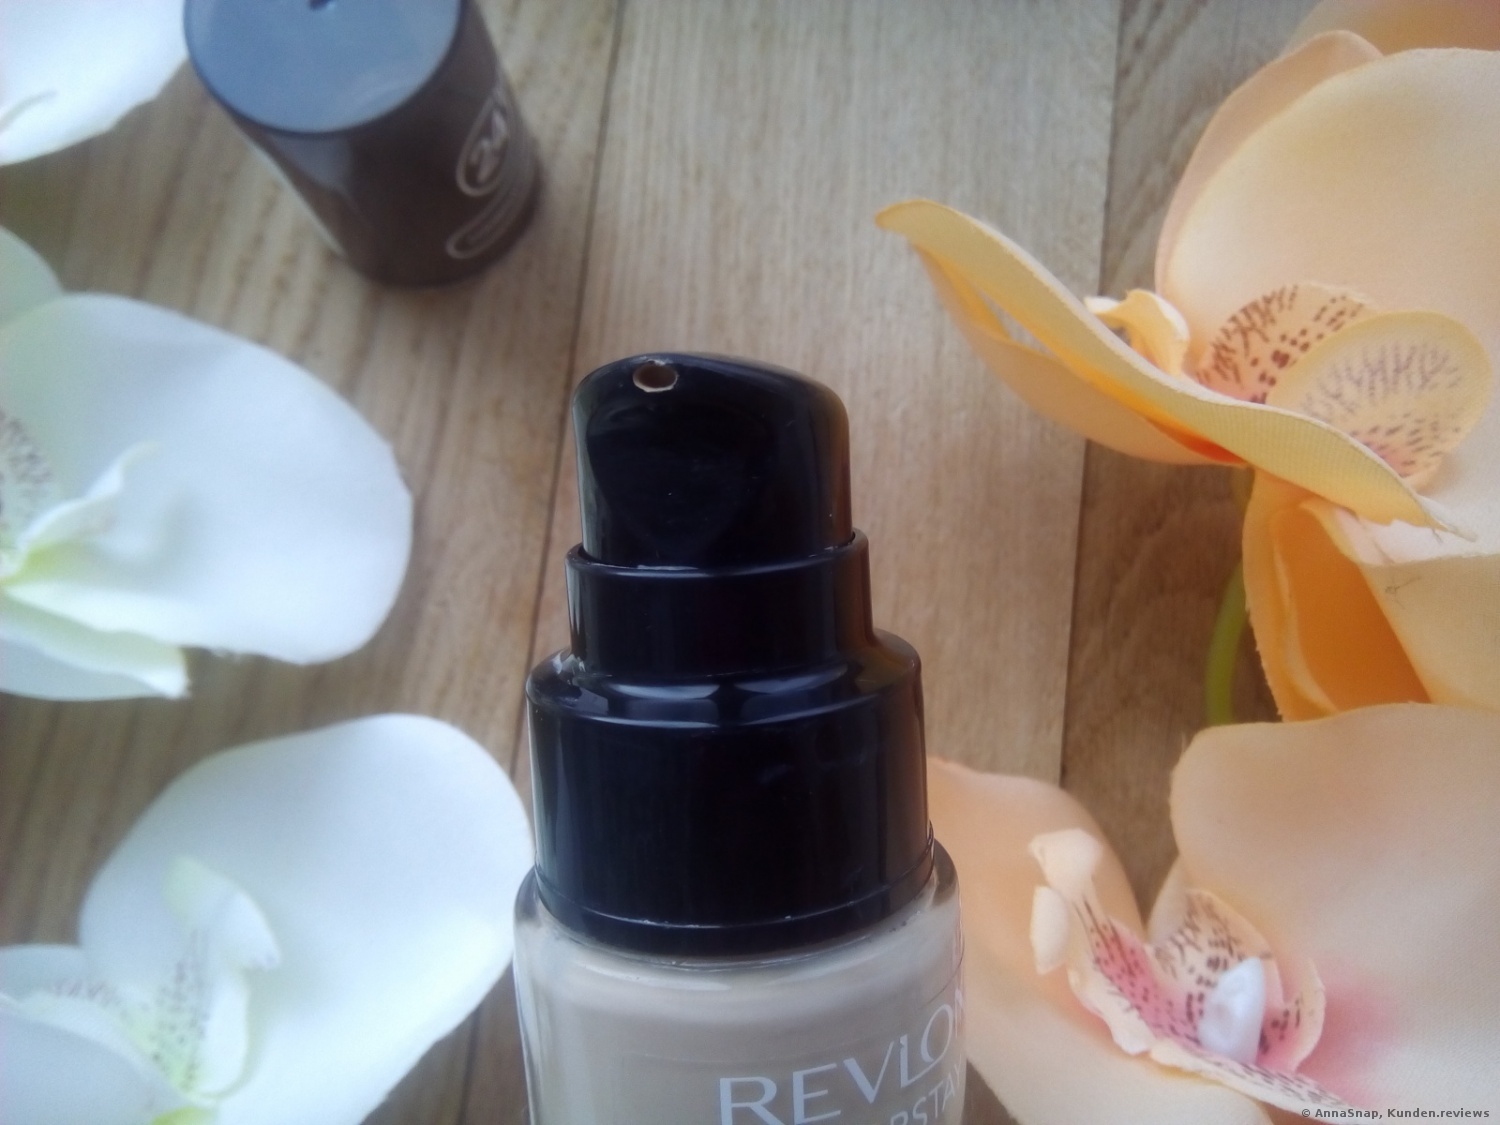 Revlon Colorstay Makeup for Combination / Oily Skin Foundation Foto